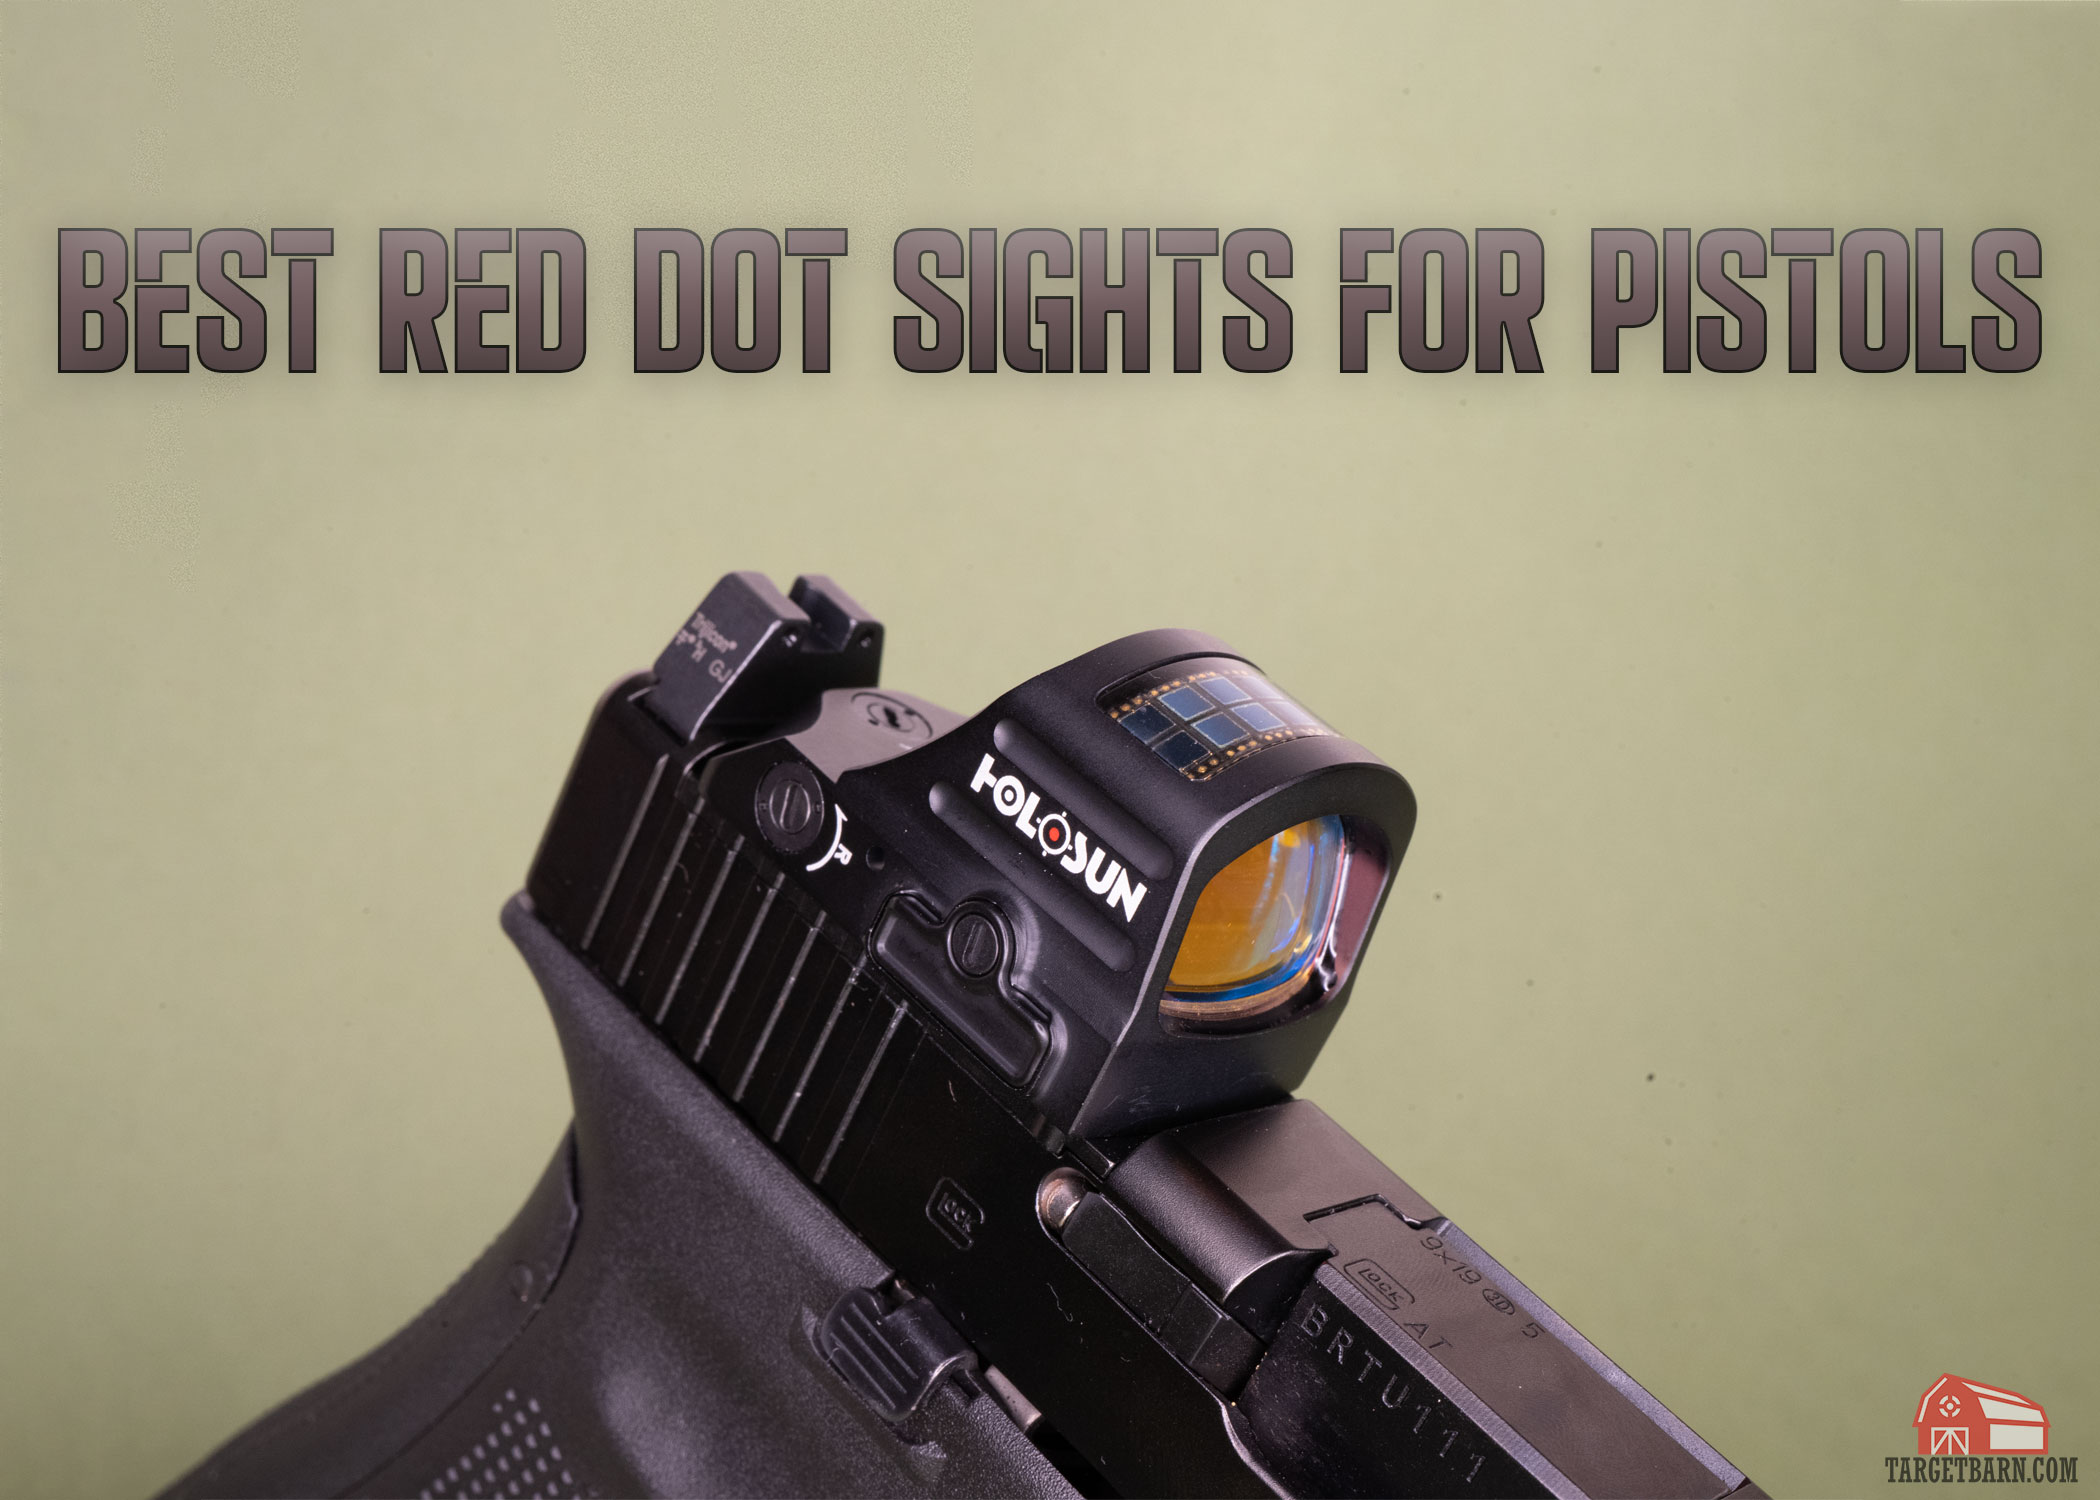 Best Pistol Red Dot Sights Top Picks for Self Defense & Competition